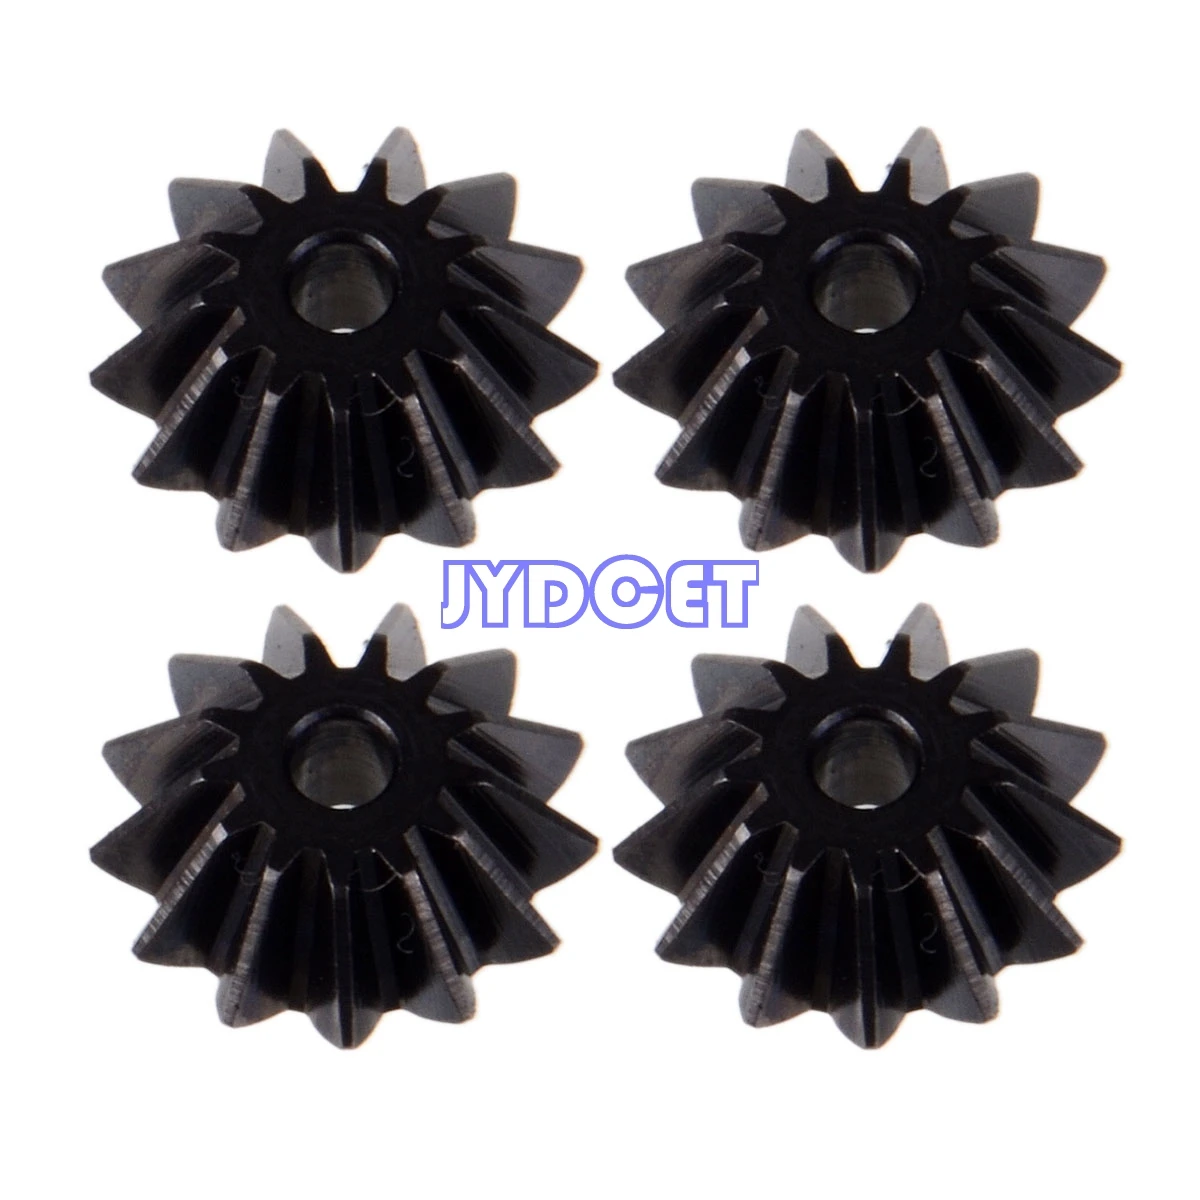 

4pcs 13Teeth Harden Steel Differential Spider Gear Set #7782 For RC CAR 1/5 TRAXXAS X-MAXX 6S 8S 77076-4 77086-4